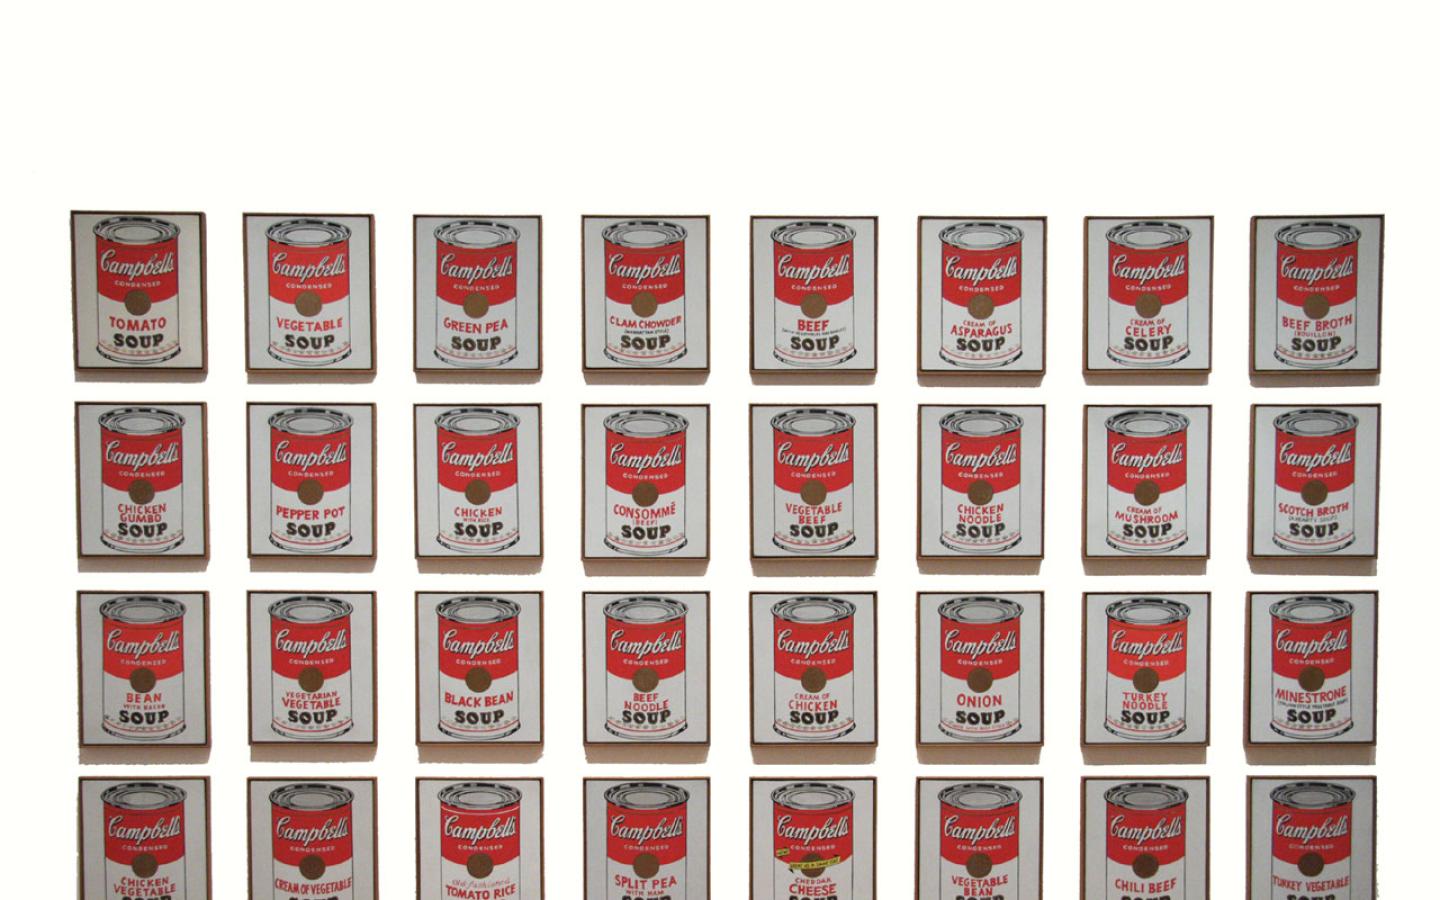 Andy Warhol - Campbell's Soup Cans (1962) Wallpaper #2 1440 x 900 